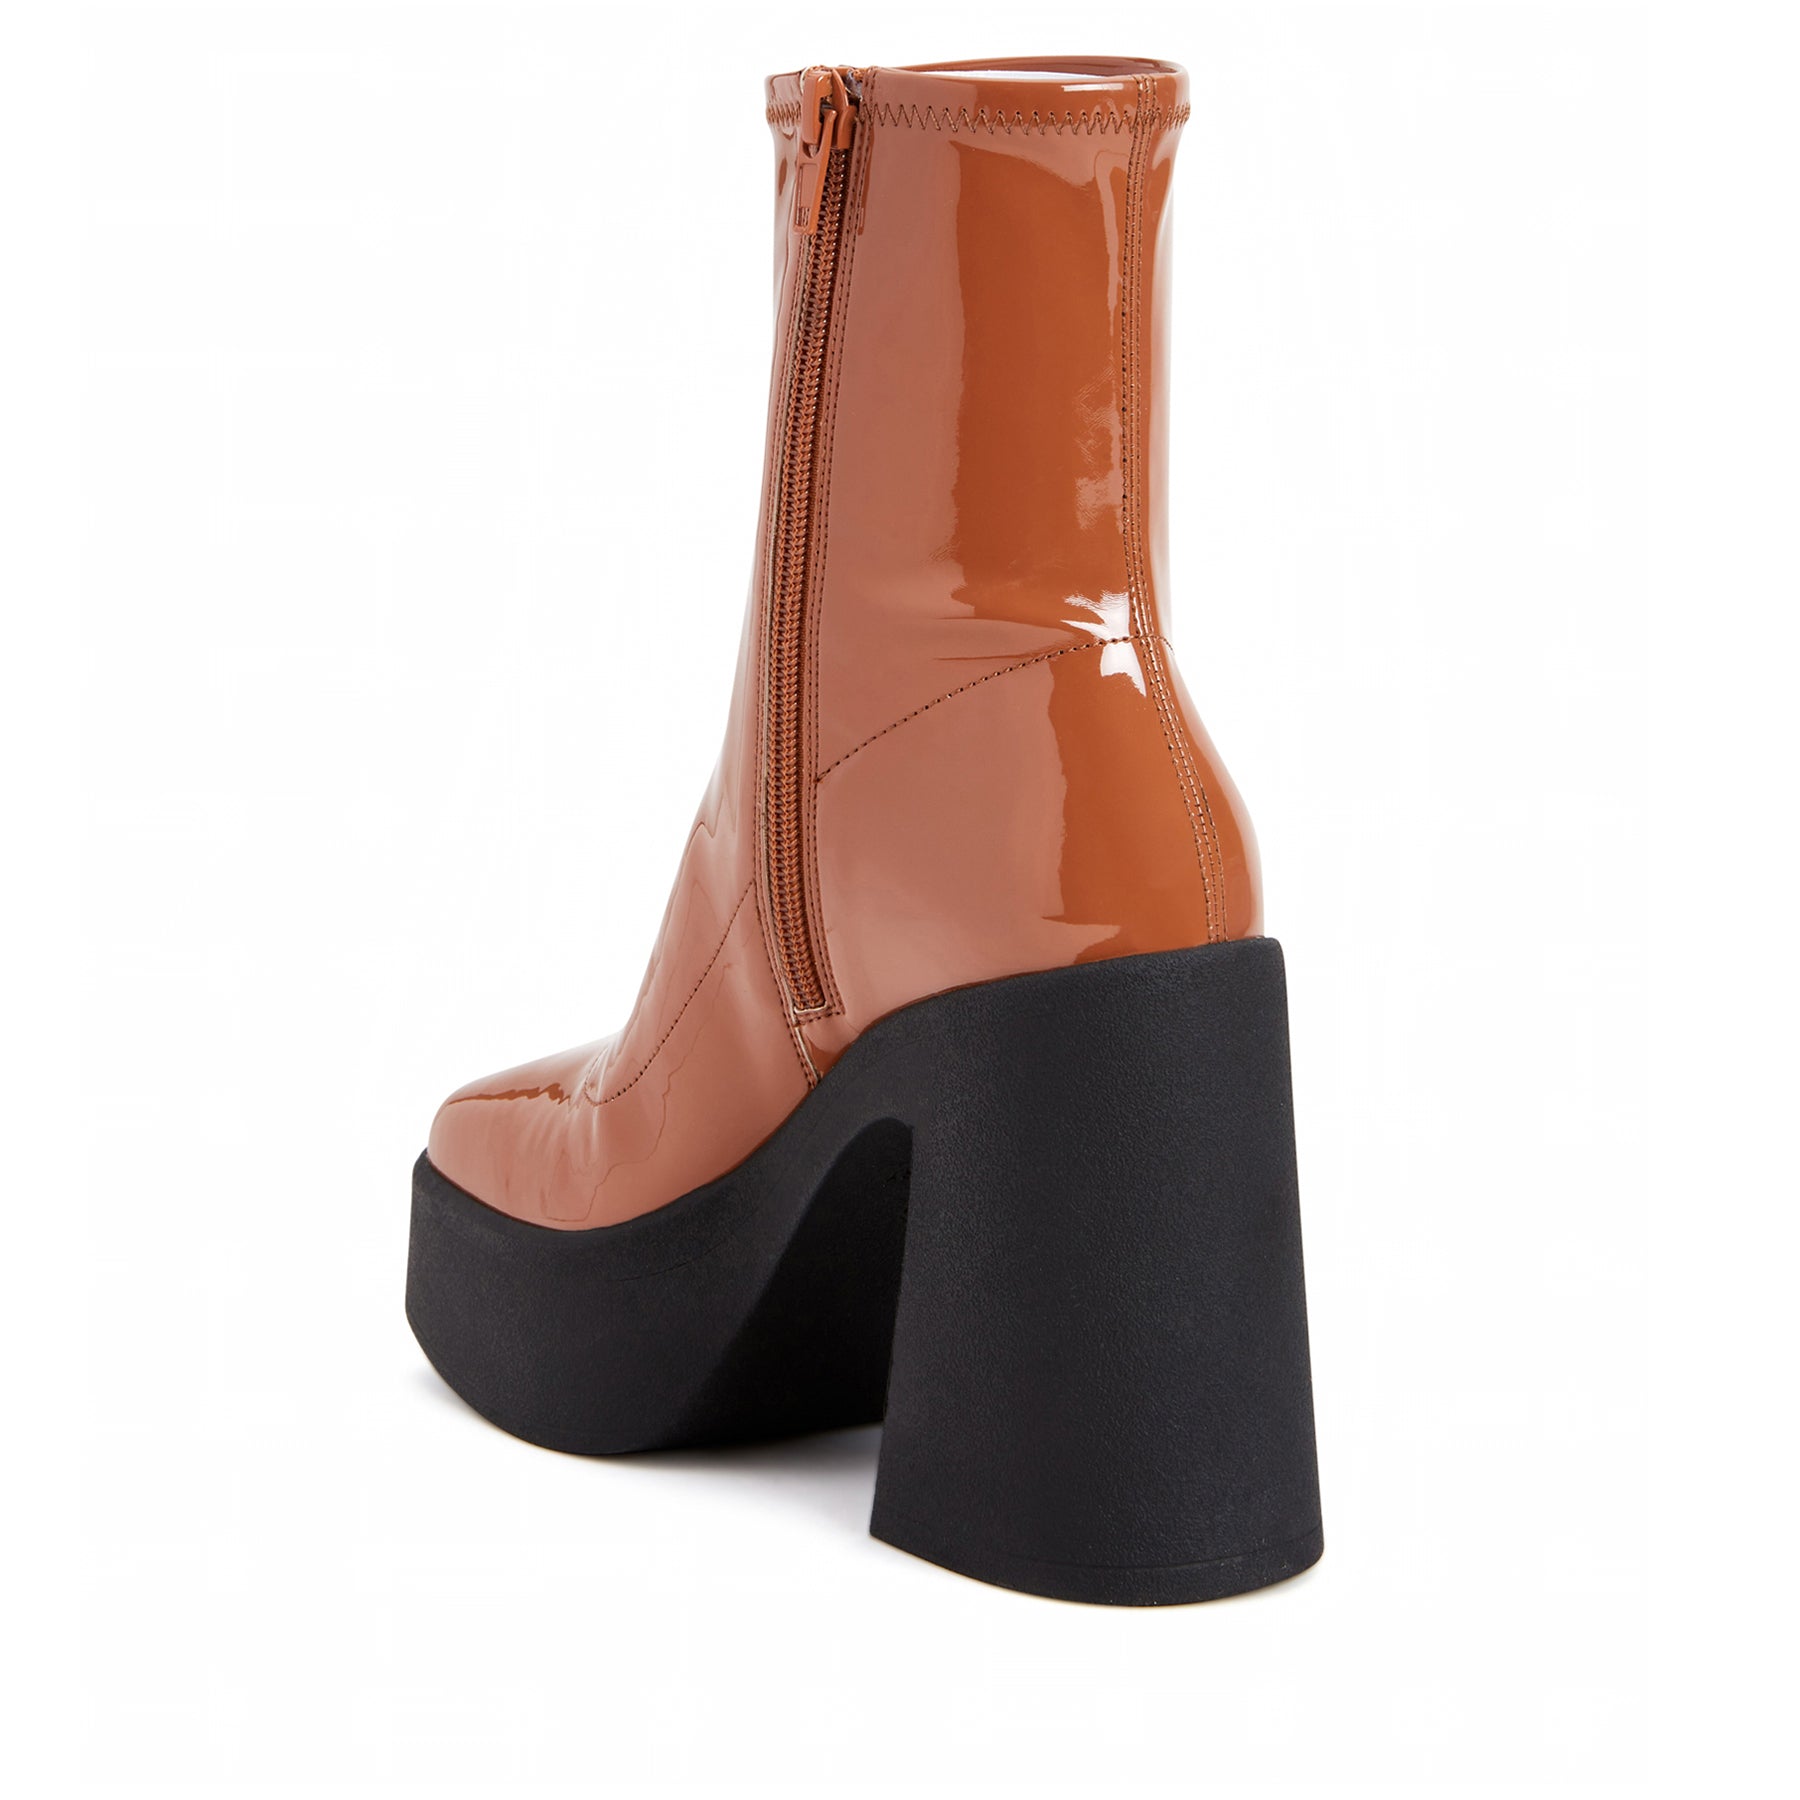 THE HEIGHTTEN STRETCH BOOTIE – Katy Perry Collections